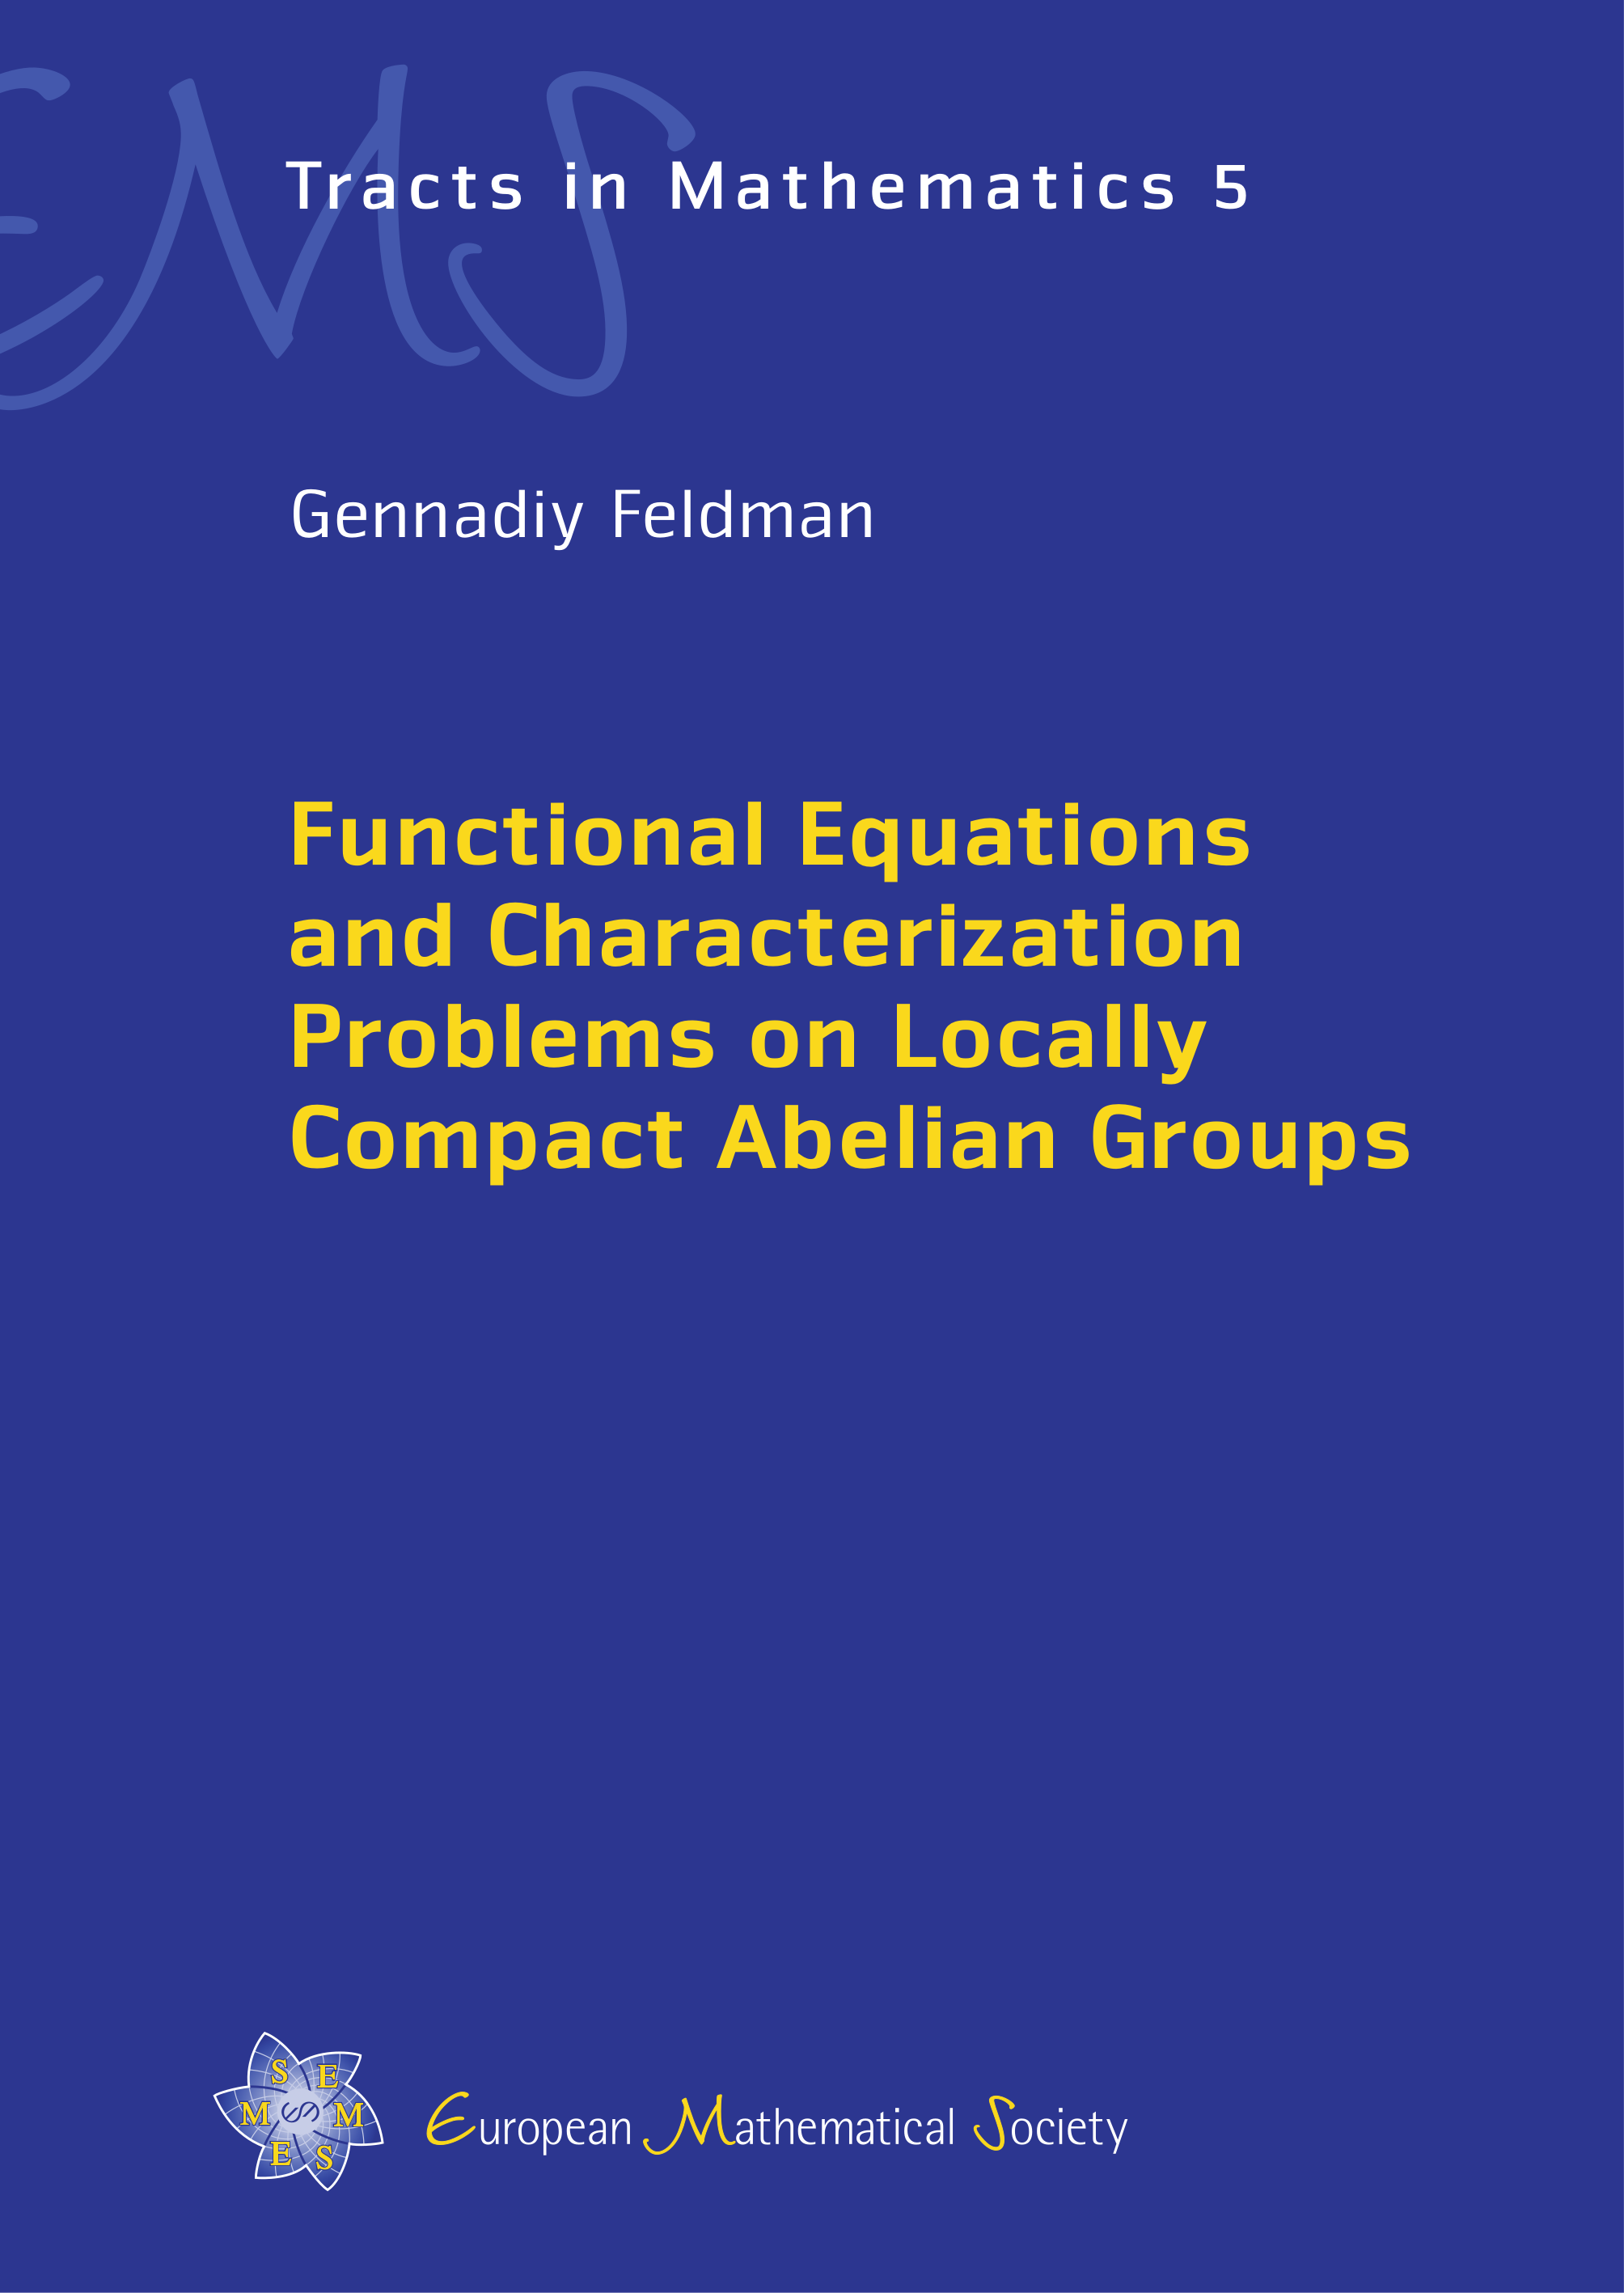 Locally compact Abelian groups for which the Kac–Bernstein theorem holds cover